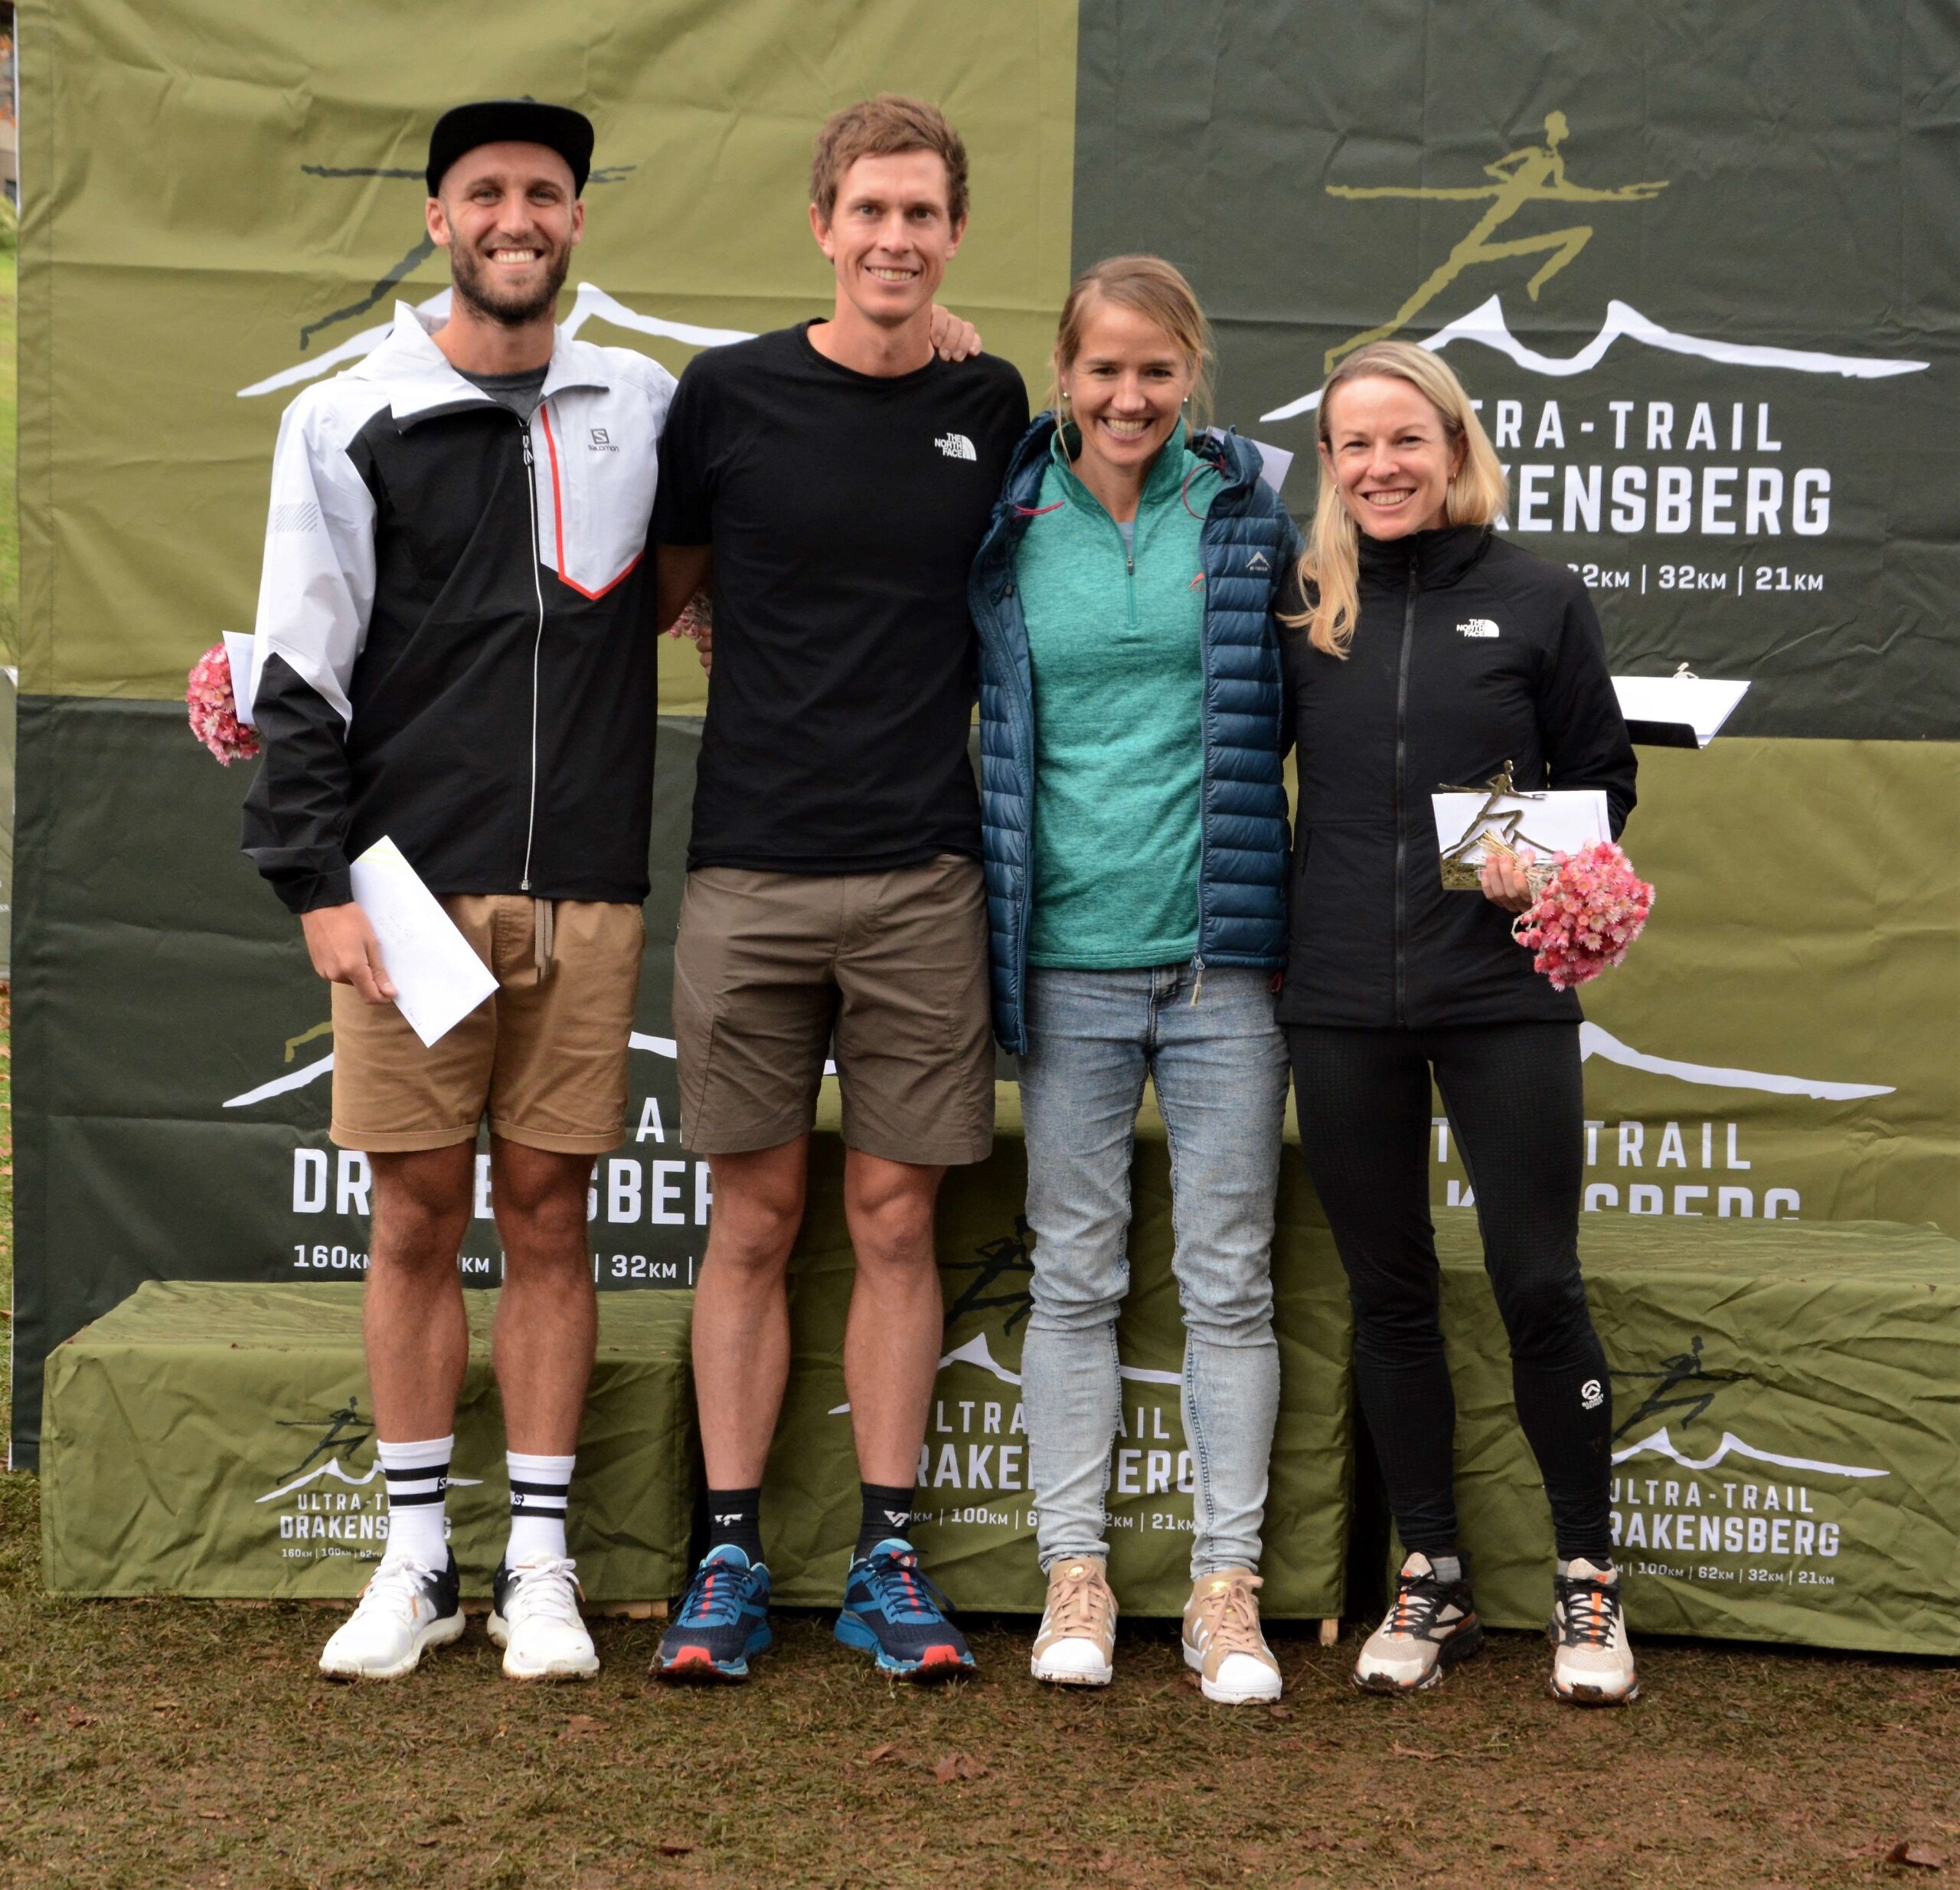 Top performers at last year's Ultra-trail Drakensberg 62km.